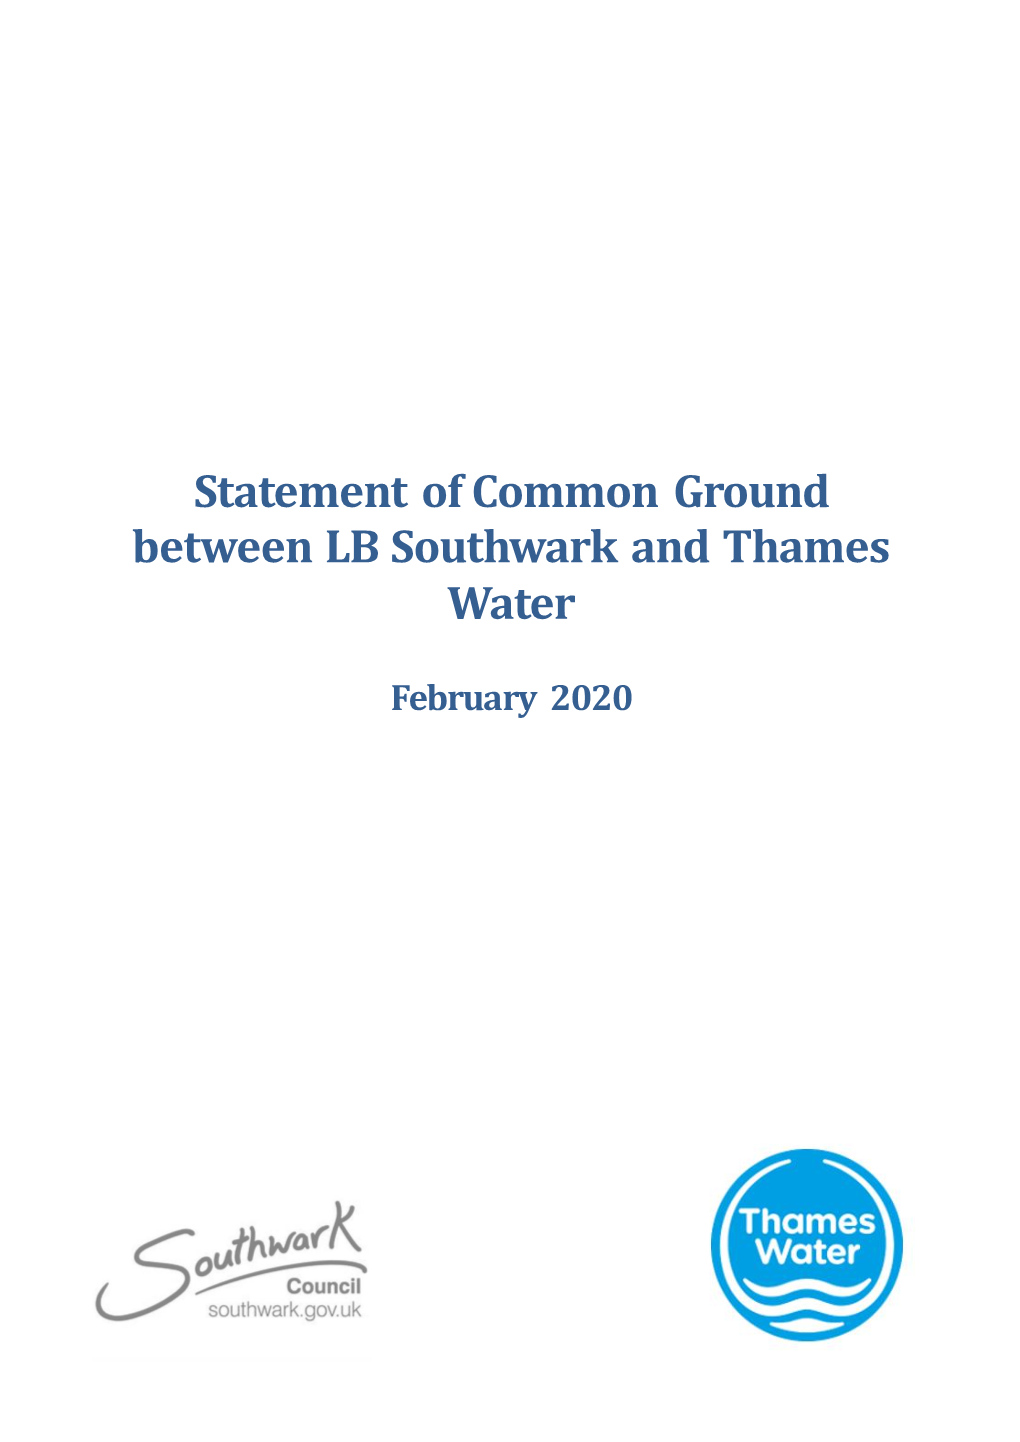 Statement of Common Ground with Thames Water